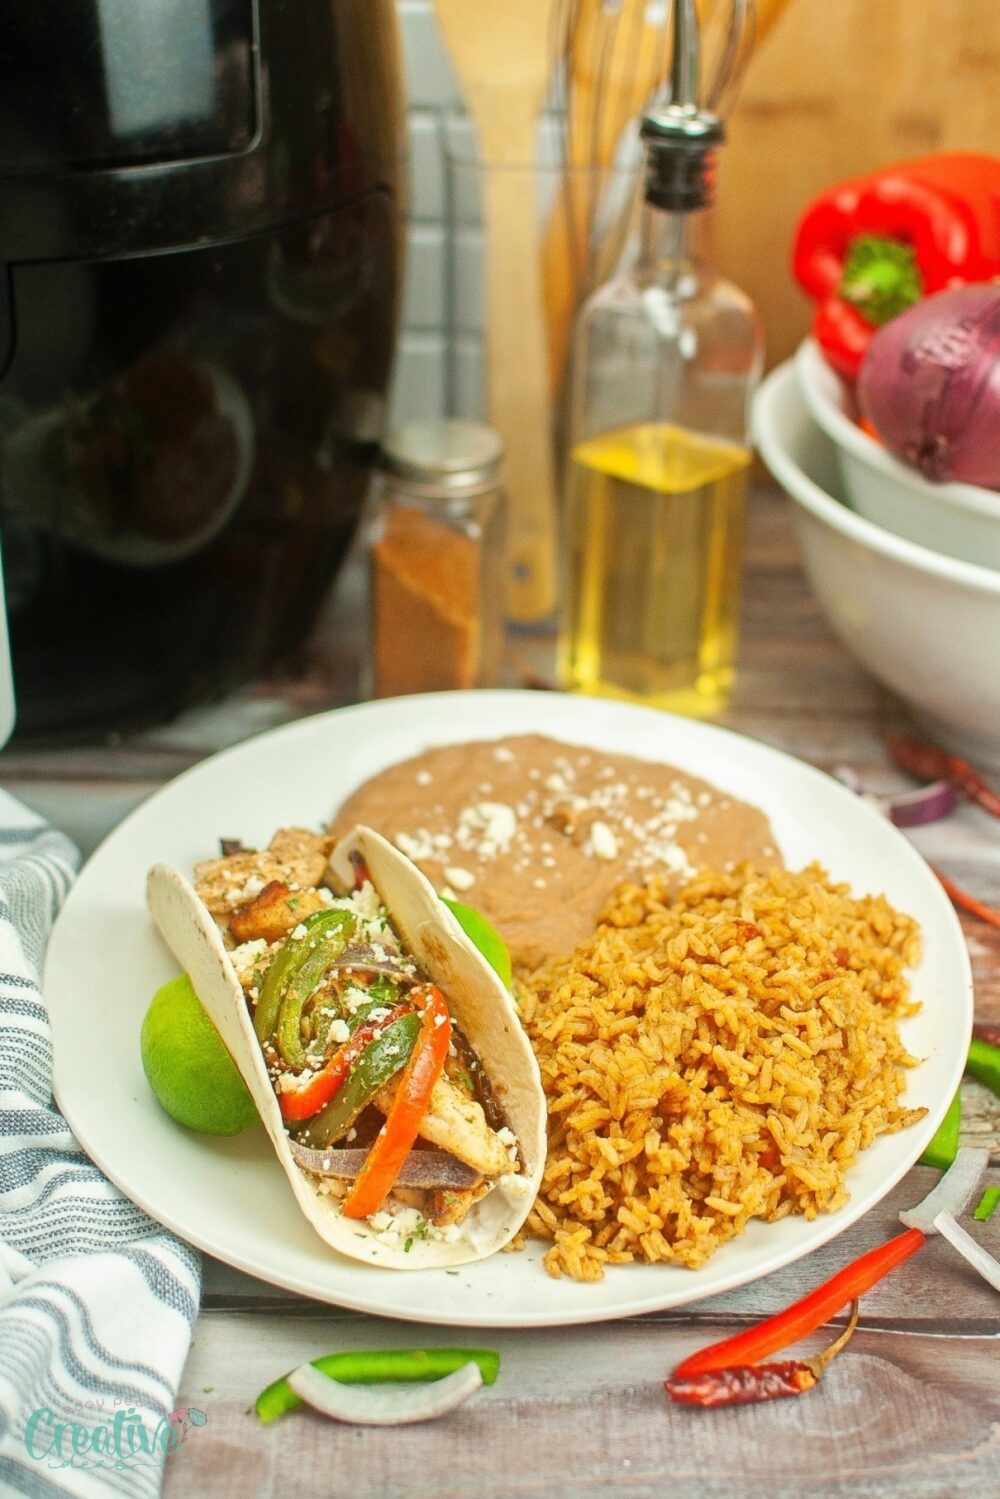 This air fryer chicken fajitas recipe is both delicious and easy to make, making it the ultimate hero for quick weeknight dinners. It's packed with flavor and are the perfect choice for a speedy meal.